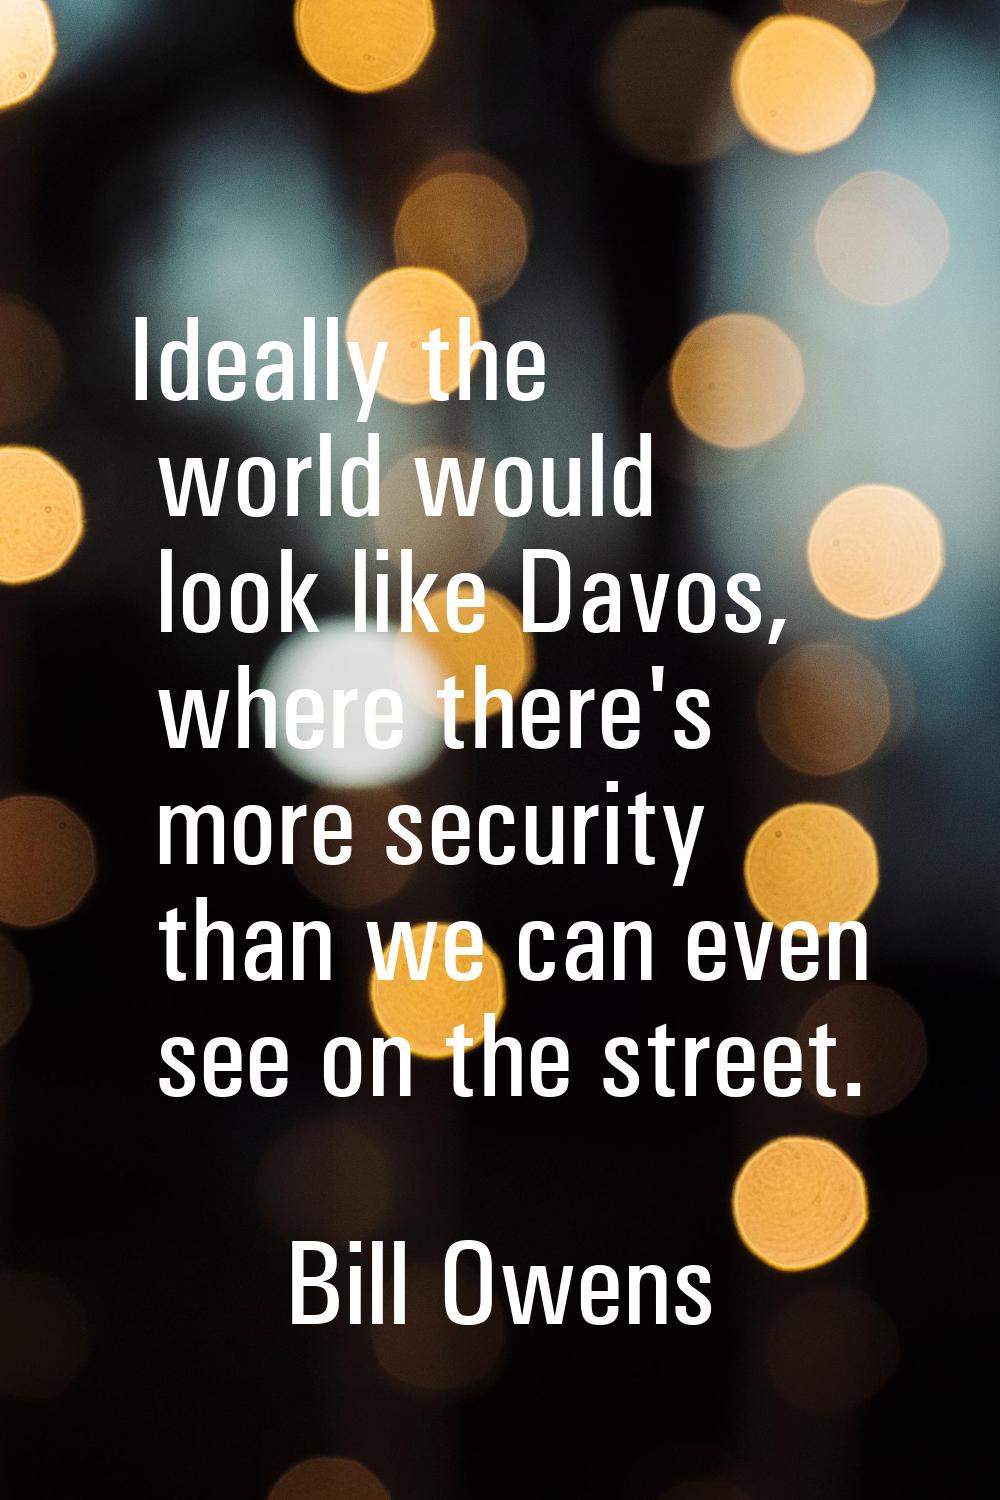 Ideally the world would look like Davos, where there's more security than we can even see on the st